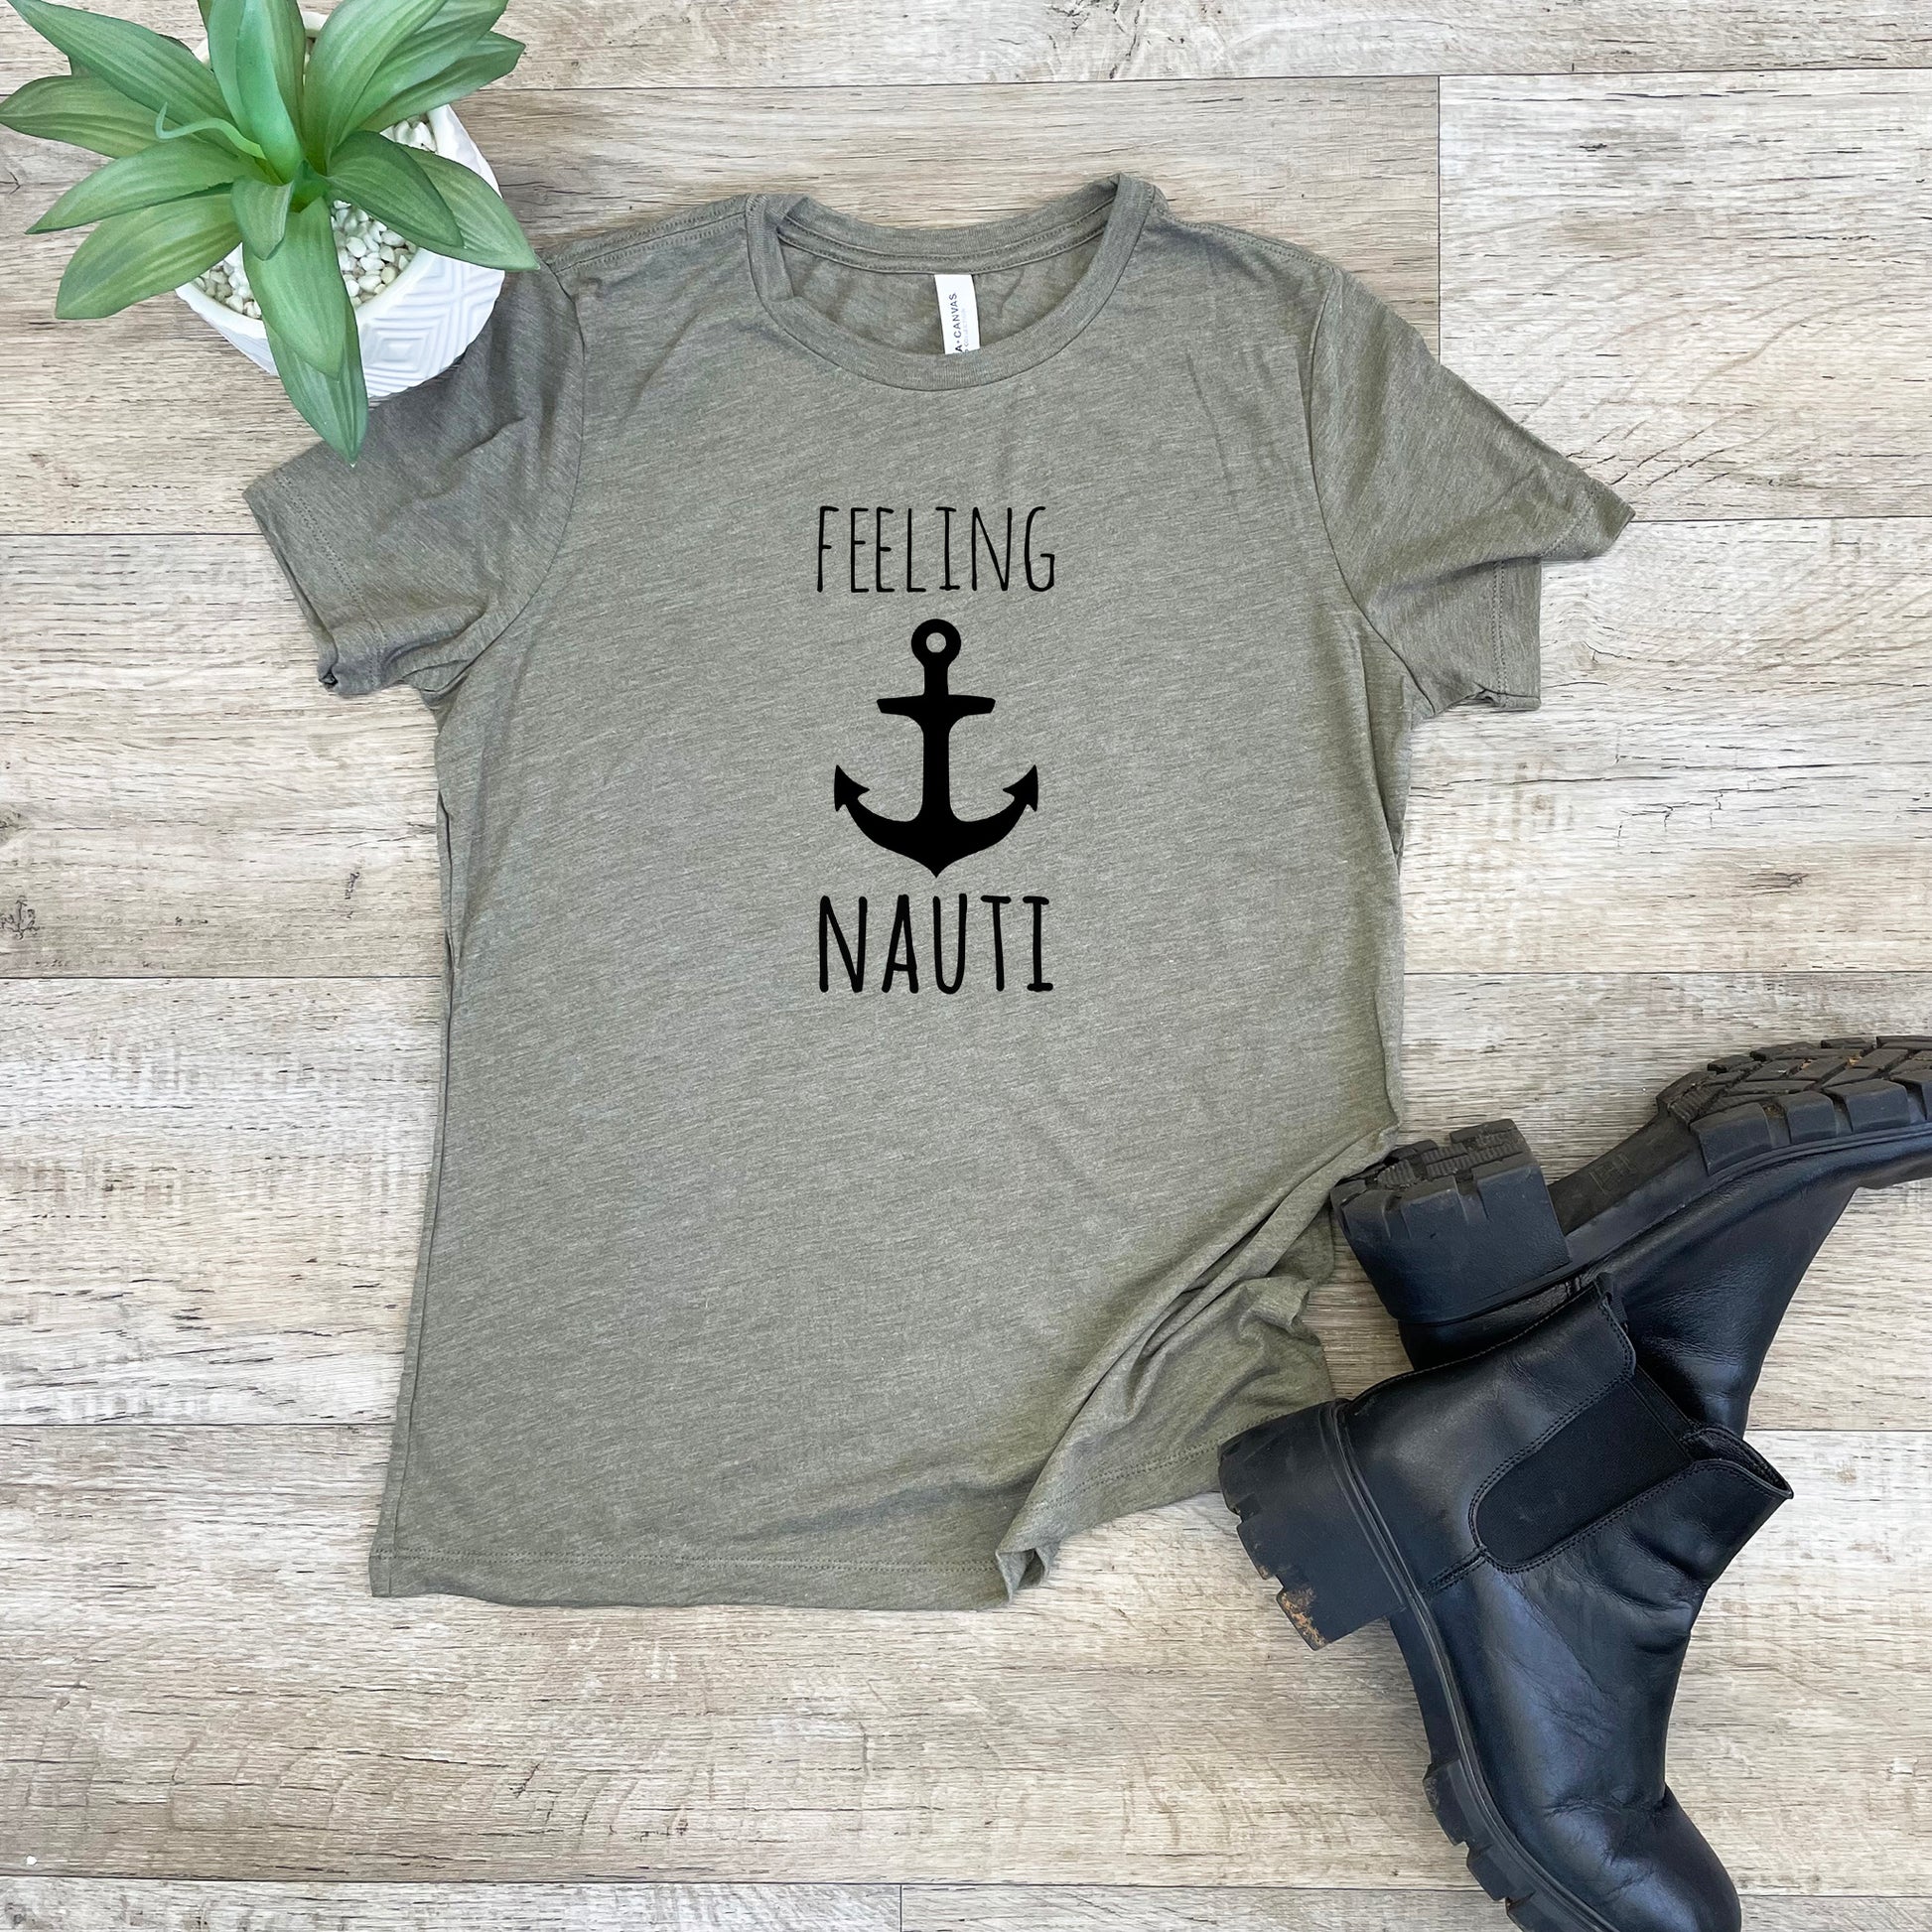 a t - shirt that says feeling nauti on it next to a pair of